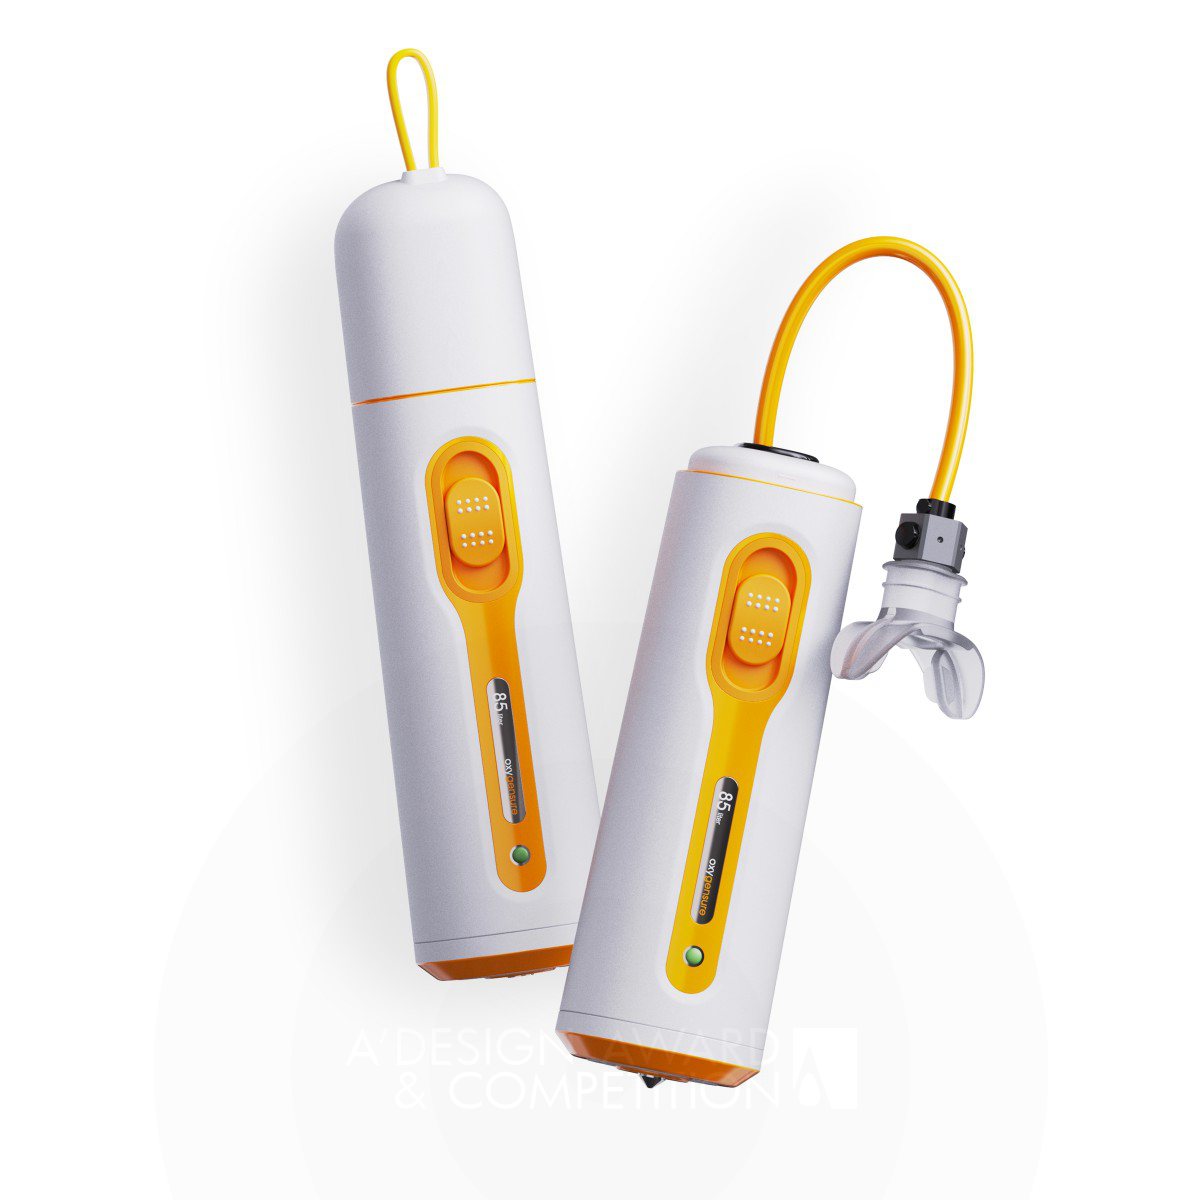 Oxygensure Rescue Bottle with Oxygen Cylinder